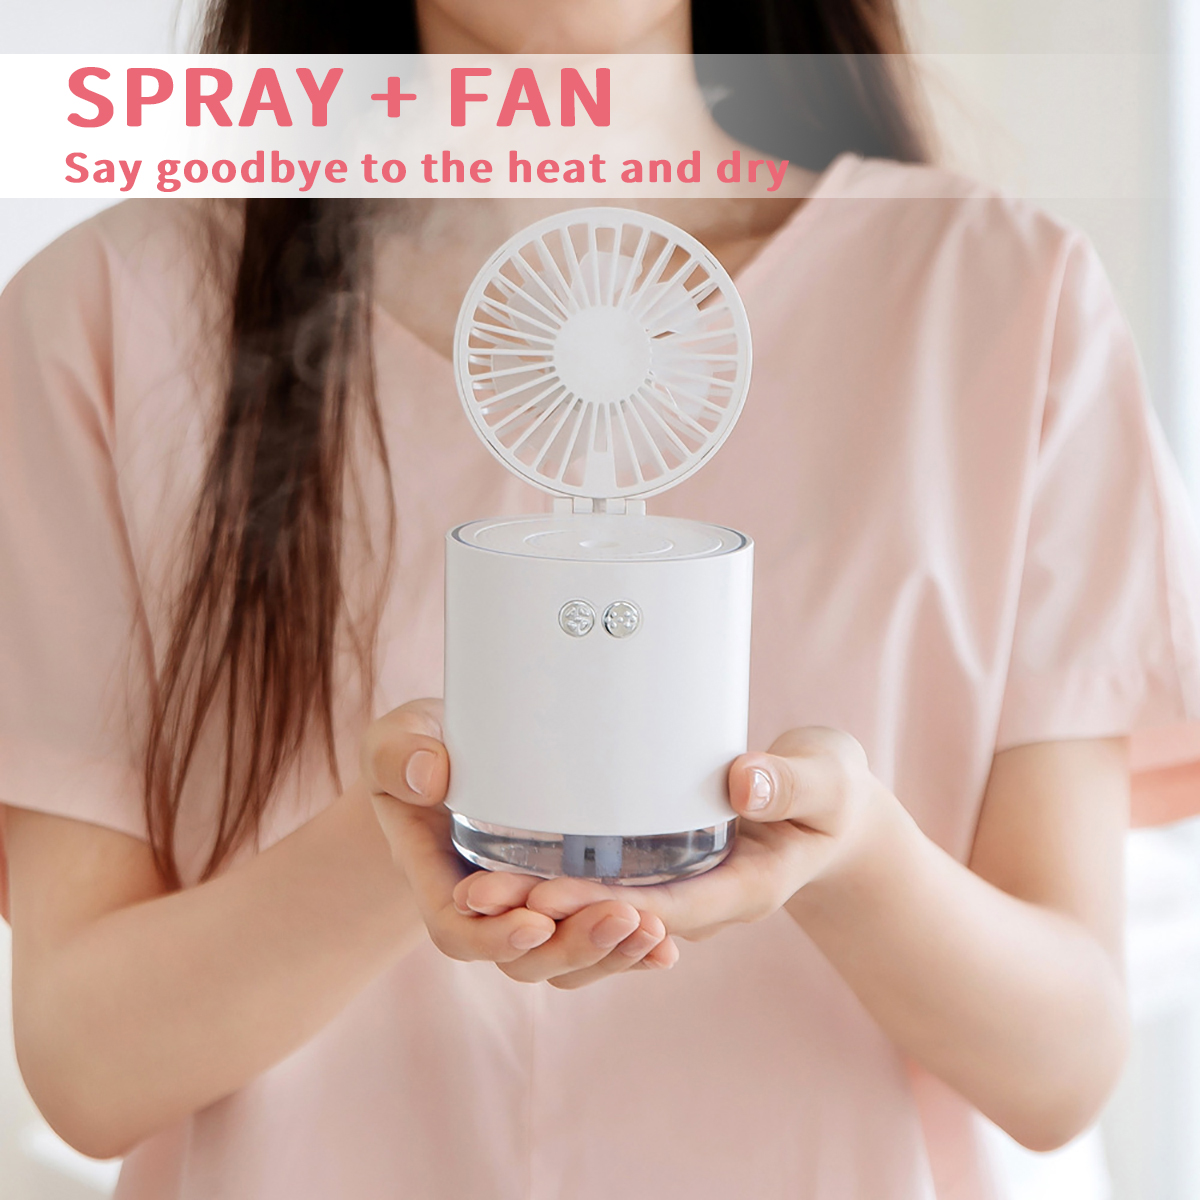 Multifunctional-2000mAh-Mini-USB-Rechargeable-Fan-Cooler-Desktop-Spray-Humidification-with-Colorful--1864518-3